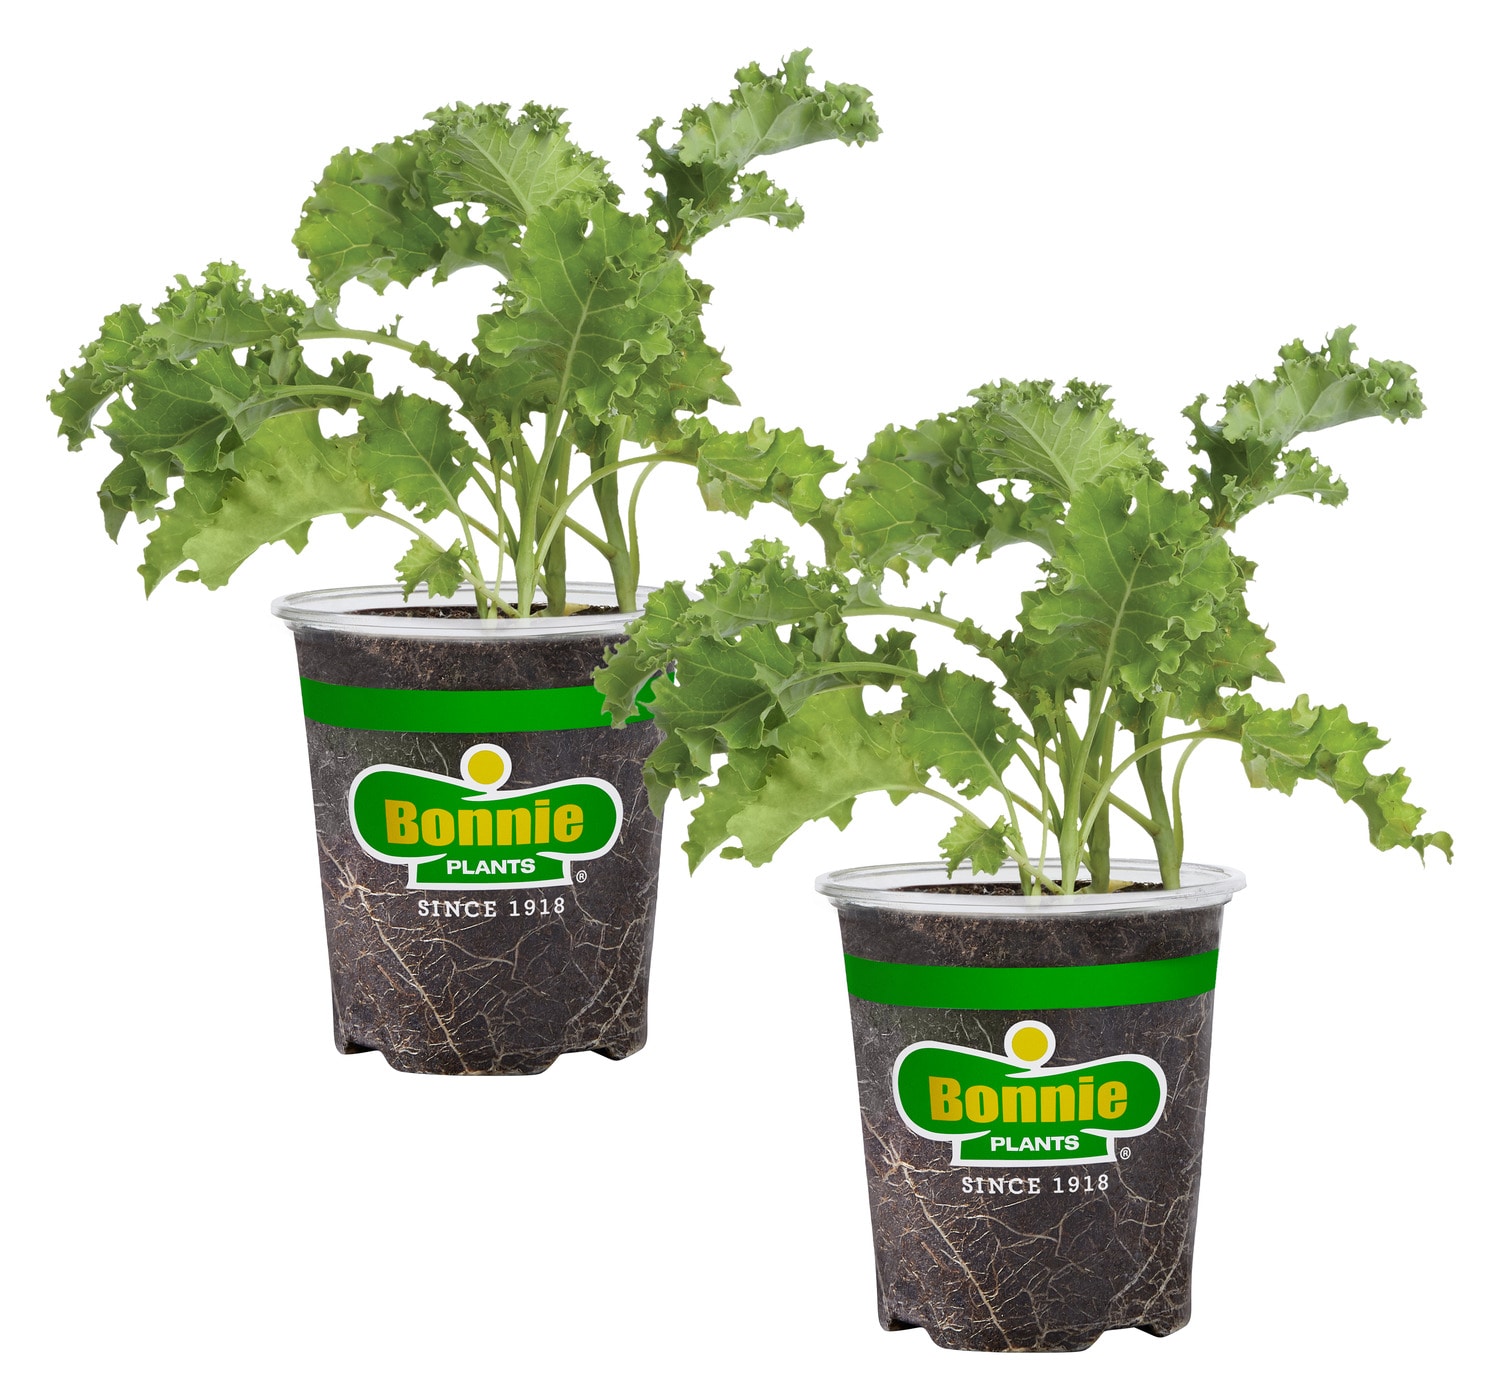 Lowe's Sweet-n-neat Cherry Tomato Plant in the Vegetable Plants department  at